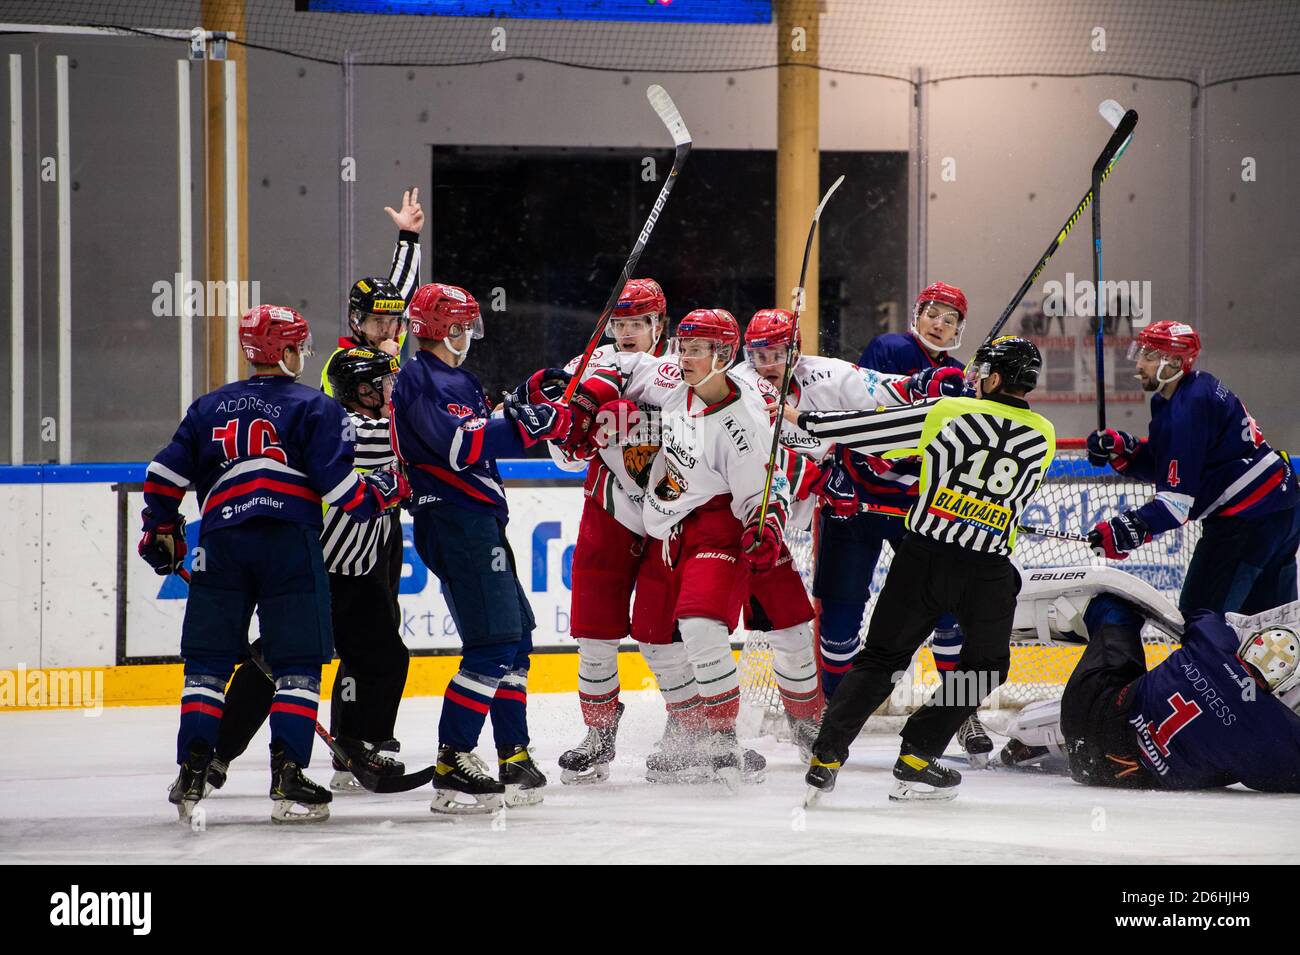 Horsholm, Denmark. 16th Oct, Infight the players of the two teams during in the Metalligaen ice hockey match between Rungsted Seier Capital and Odense Bulldogs at Bitcoin Arena in Horsmolm. (